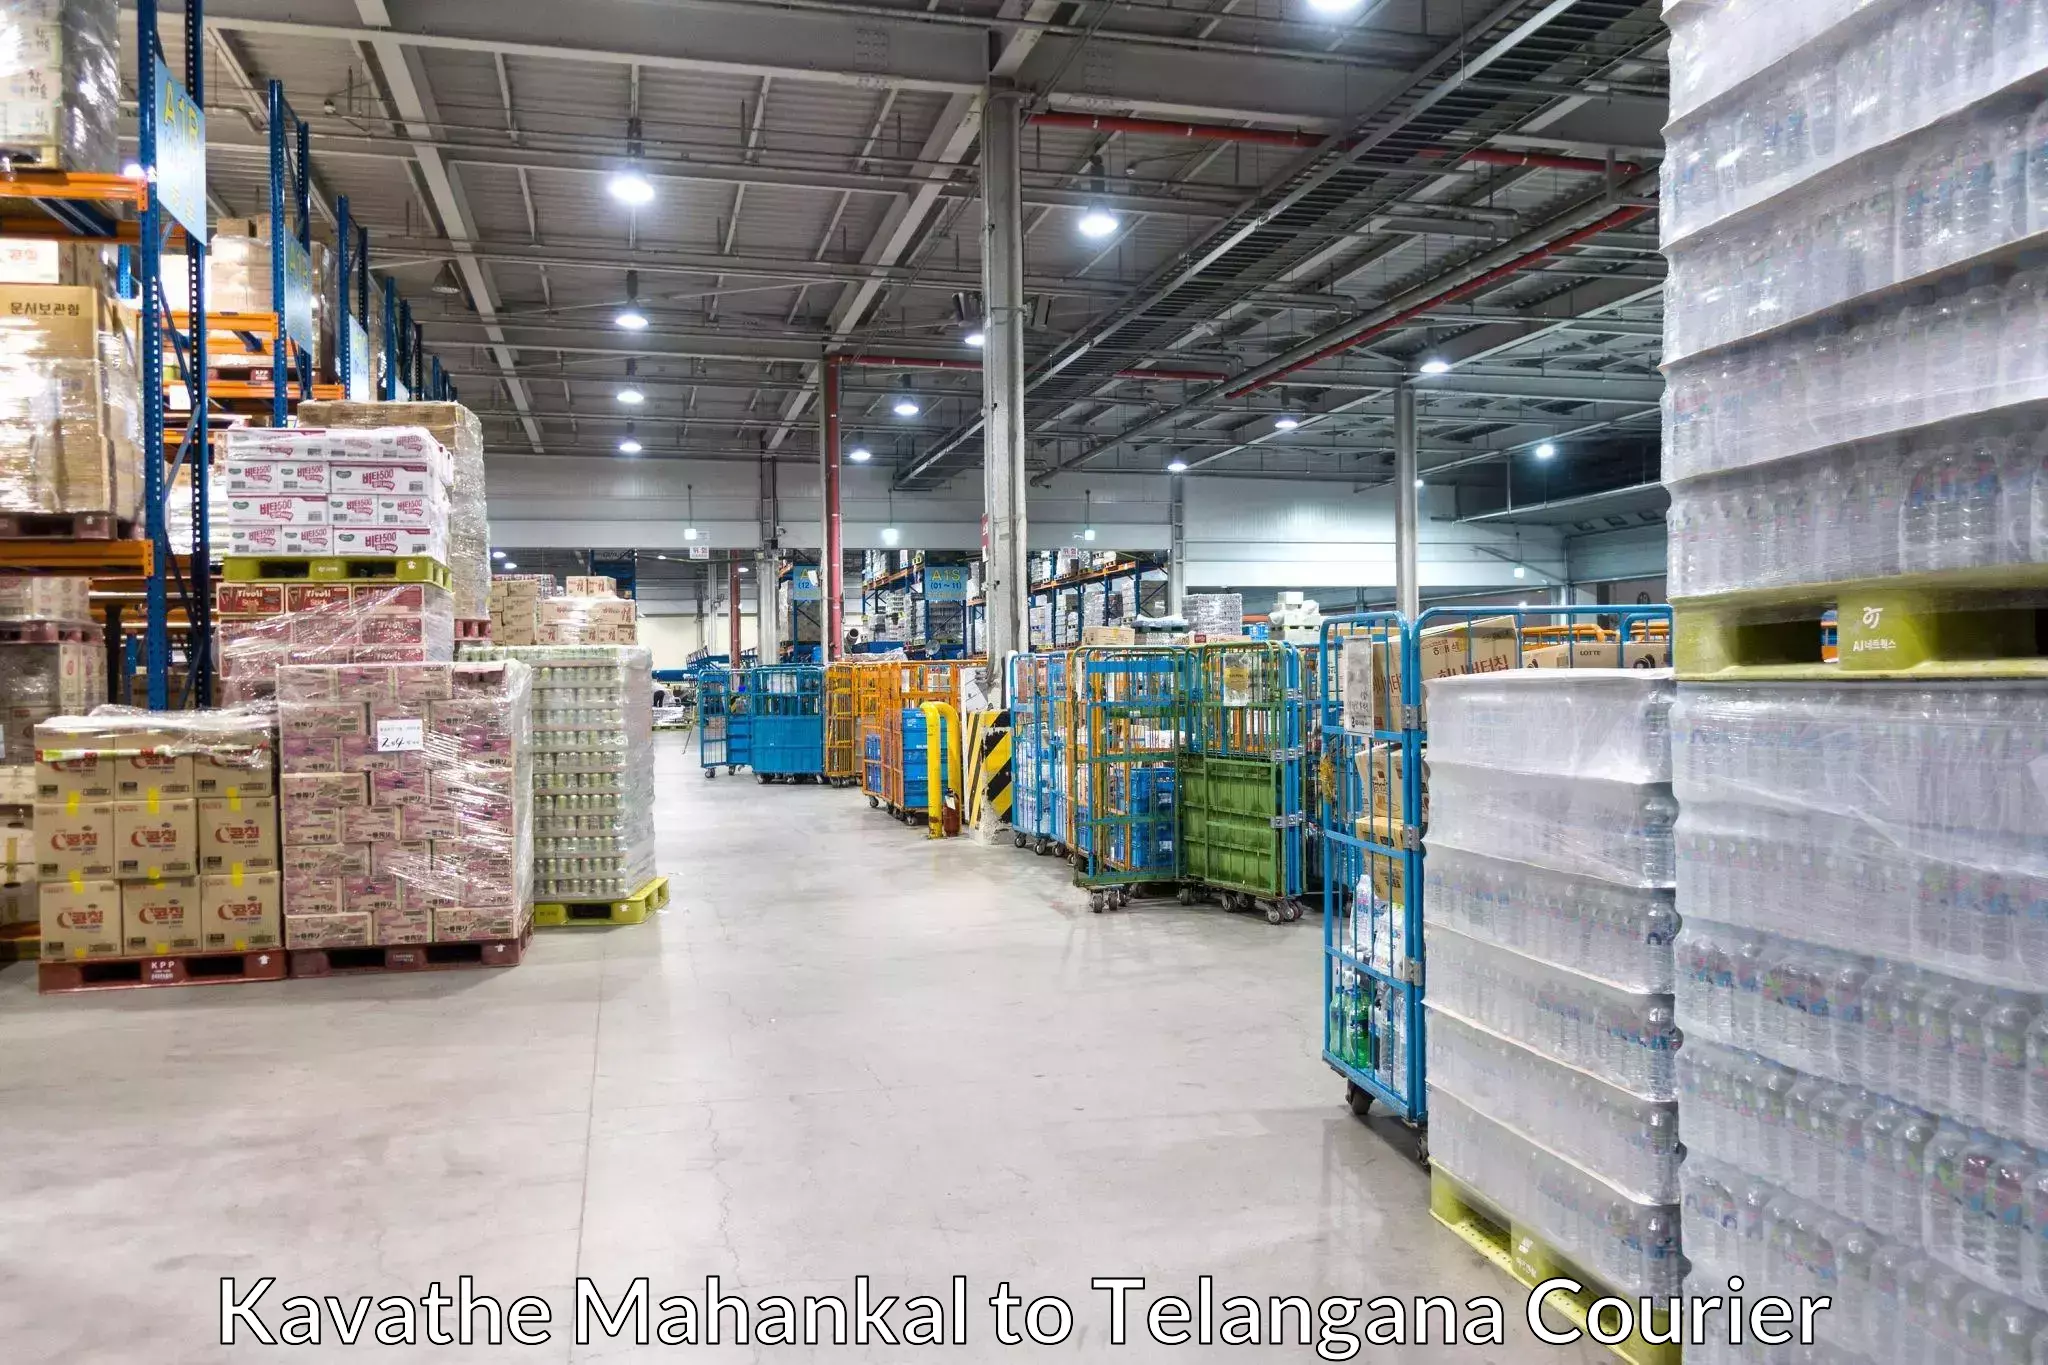 Efficient order fulfillment in Kavathe Mahankal to Luxettipet